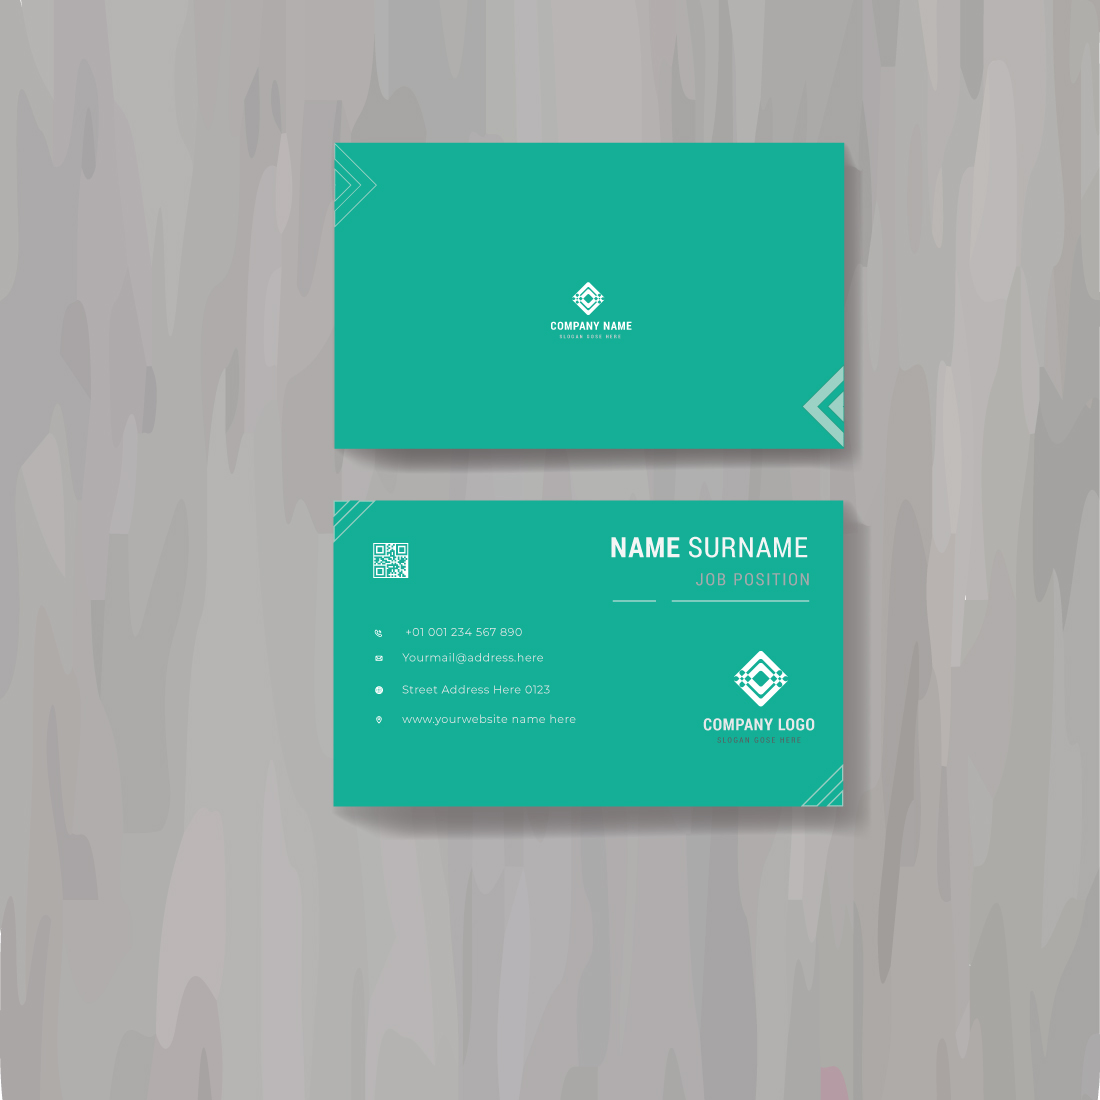 Corporate business card template for your company | Minimalist business card template design | Creative business card template preview image.